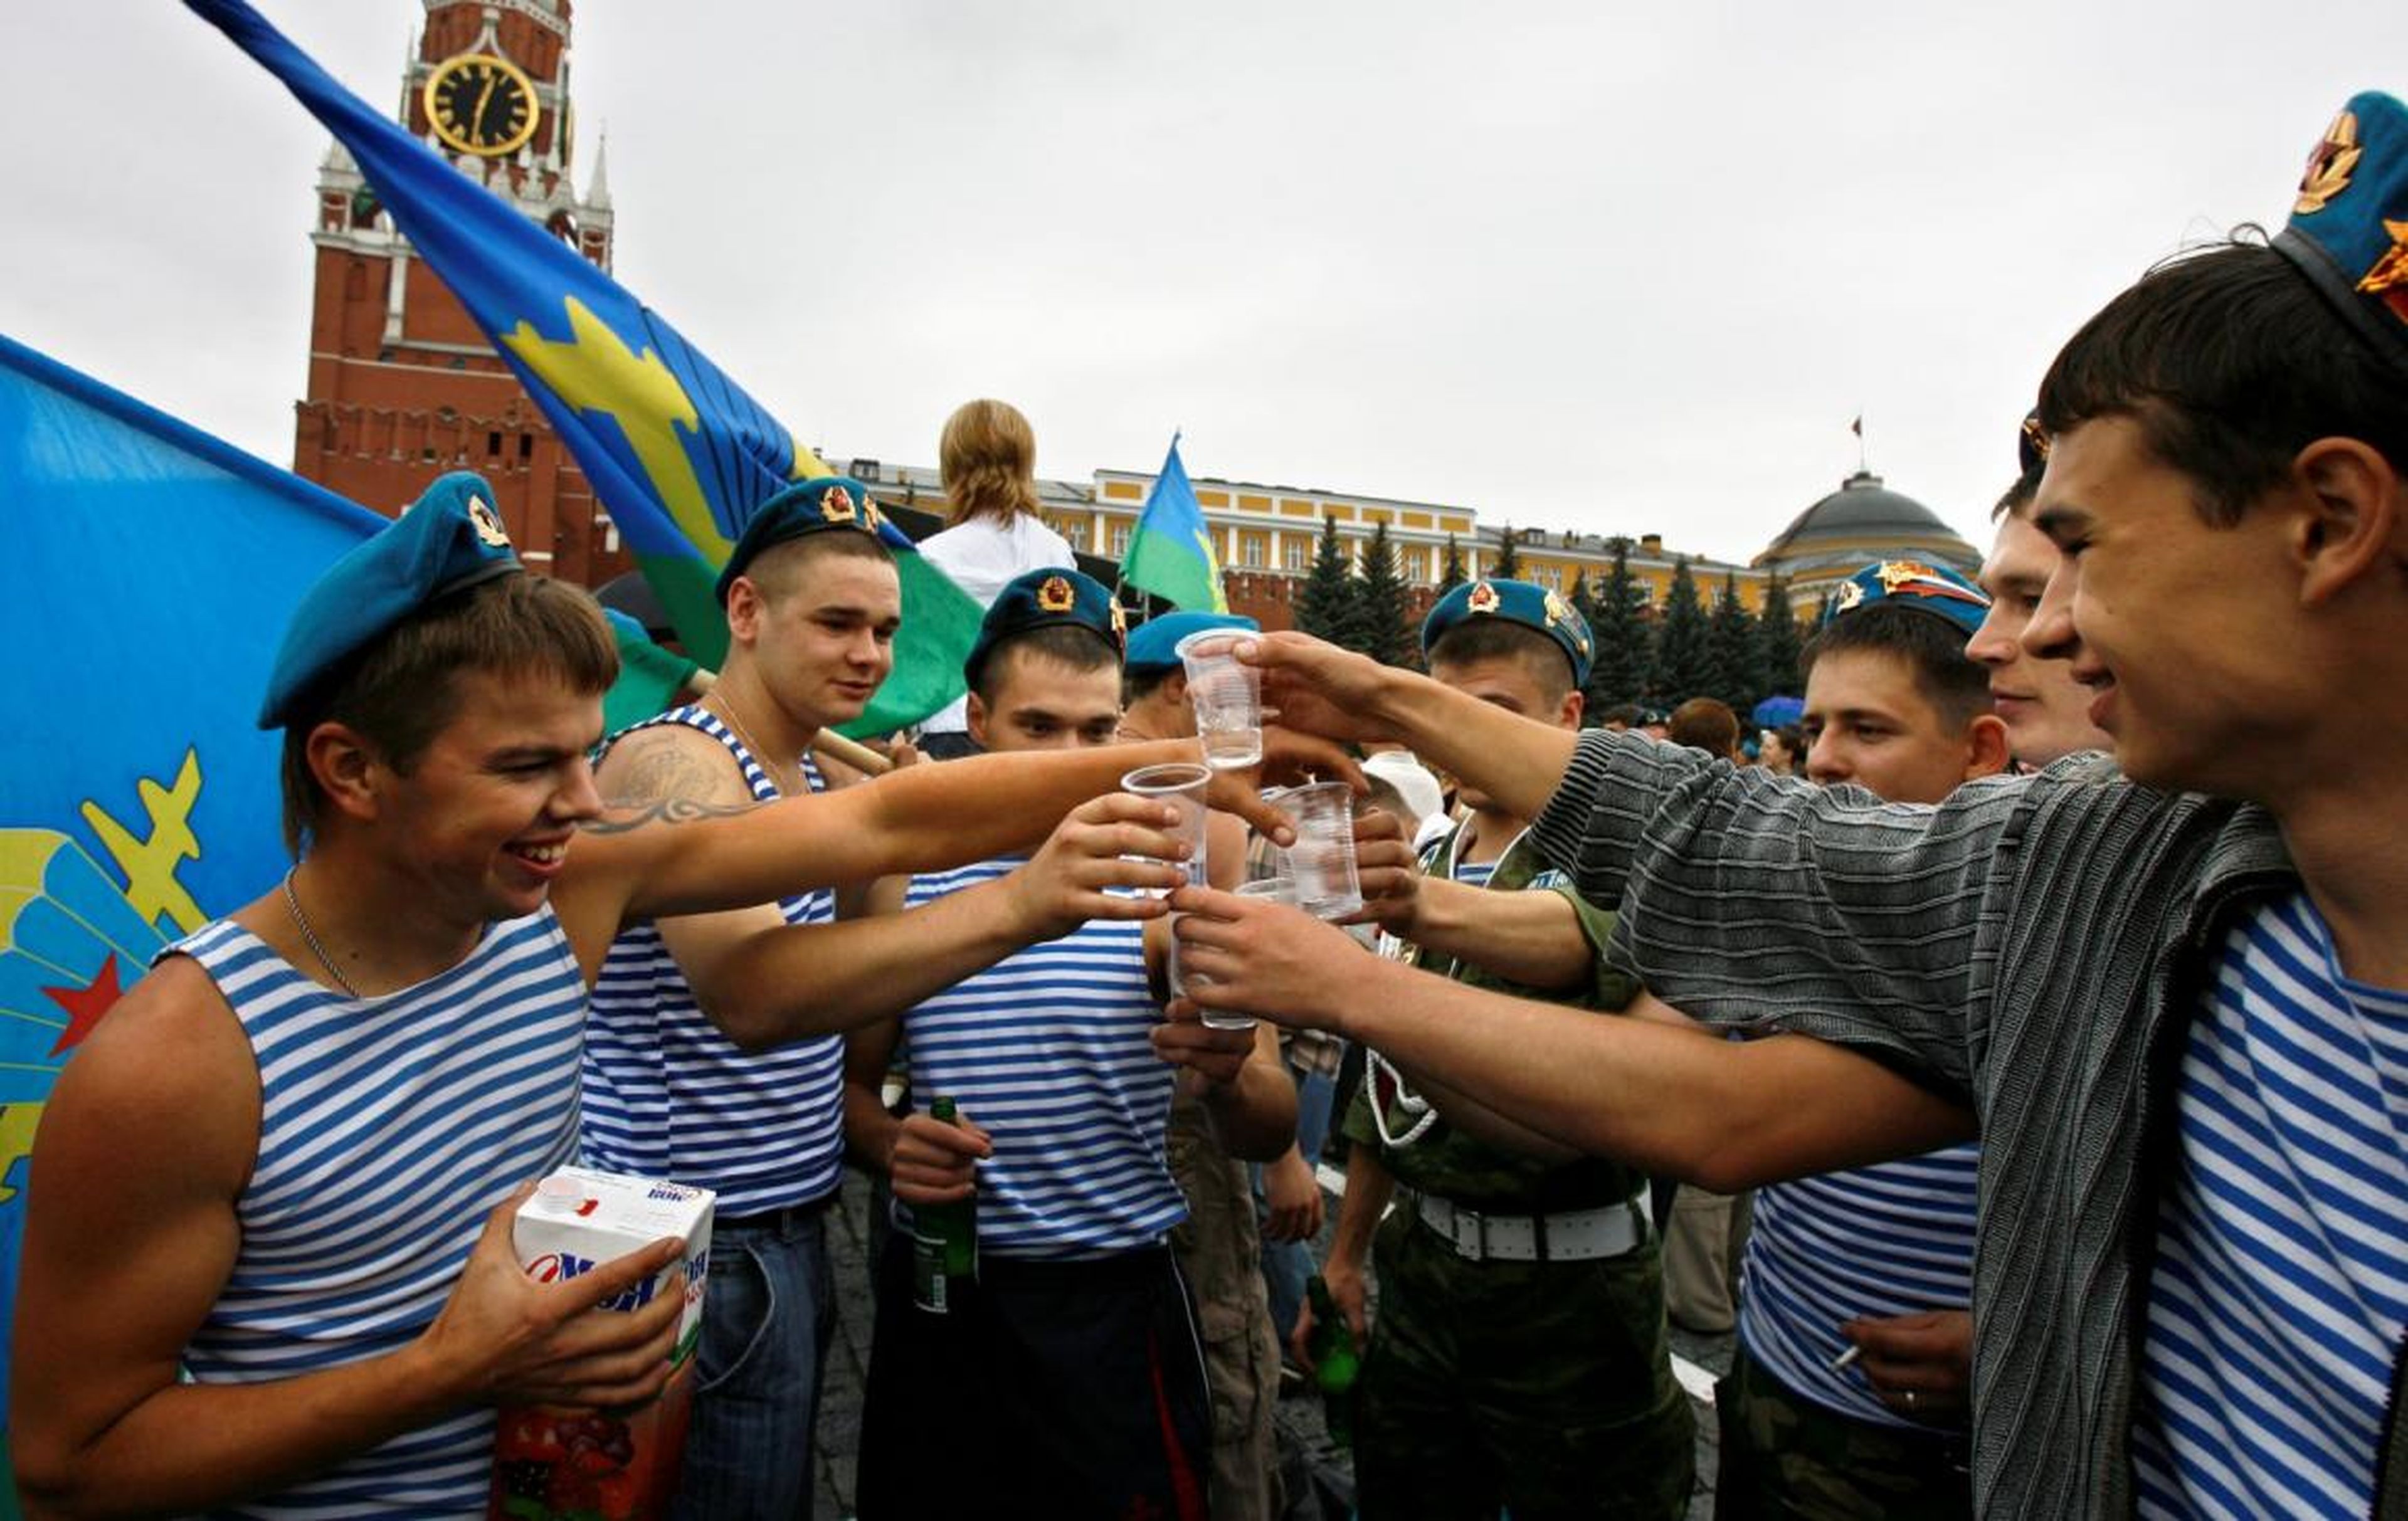 Russian vodka consumption has dropped by more than 50% in the past 20 years